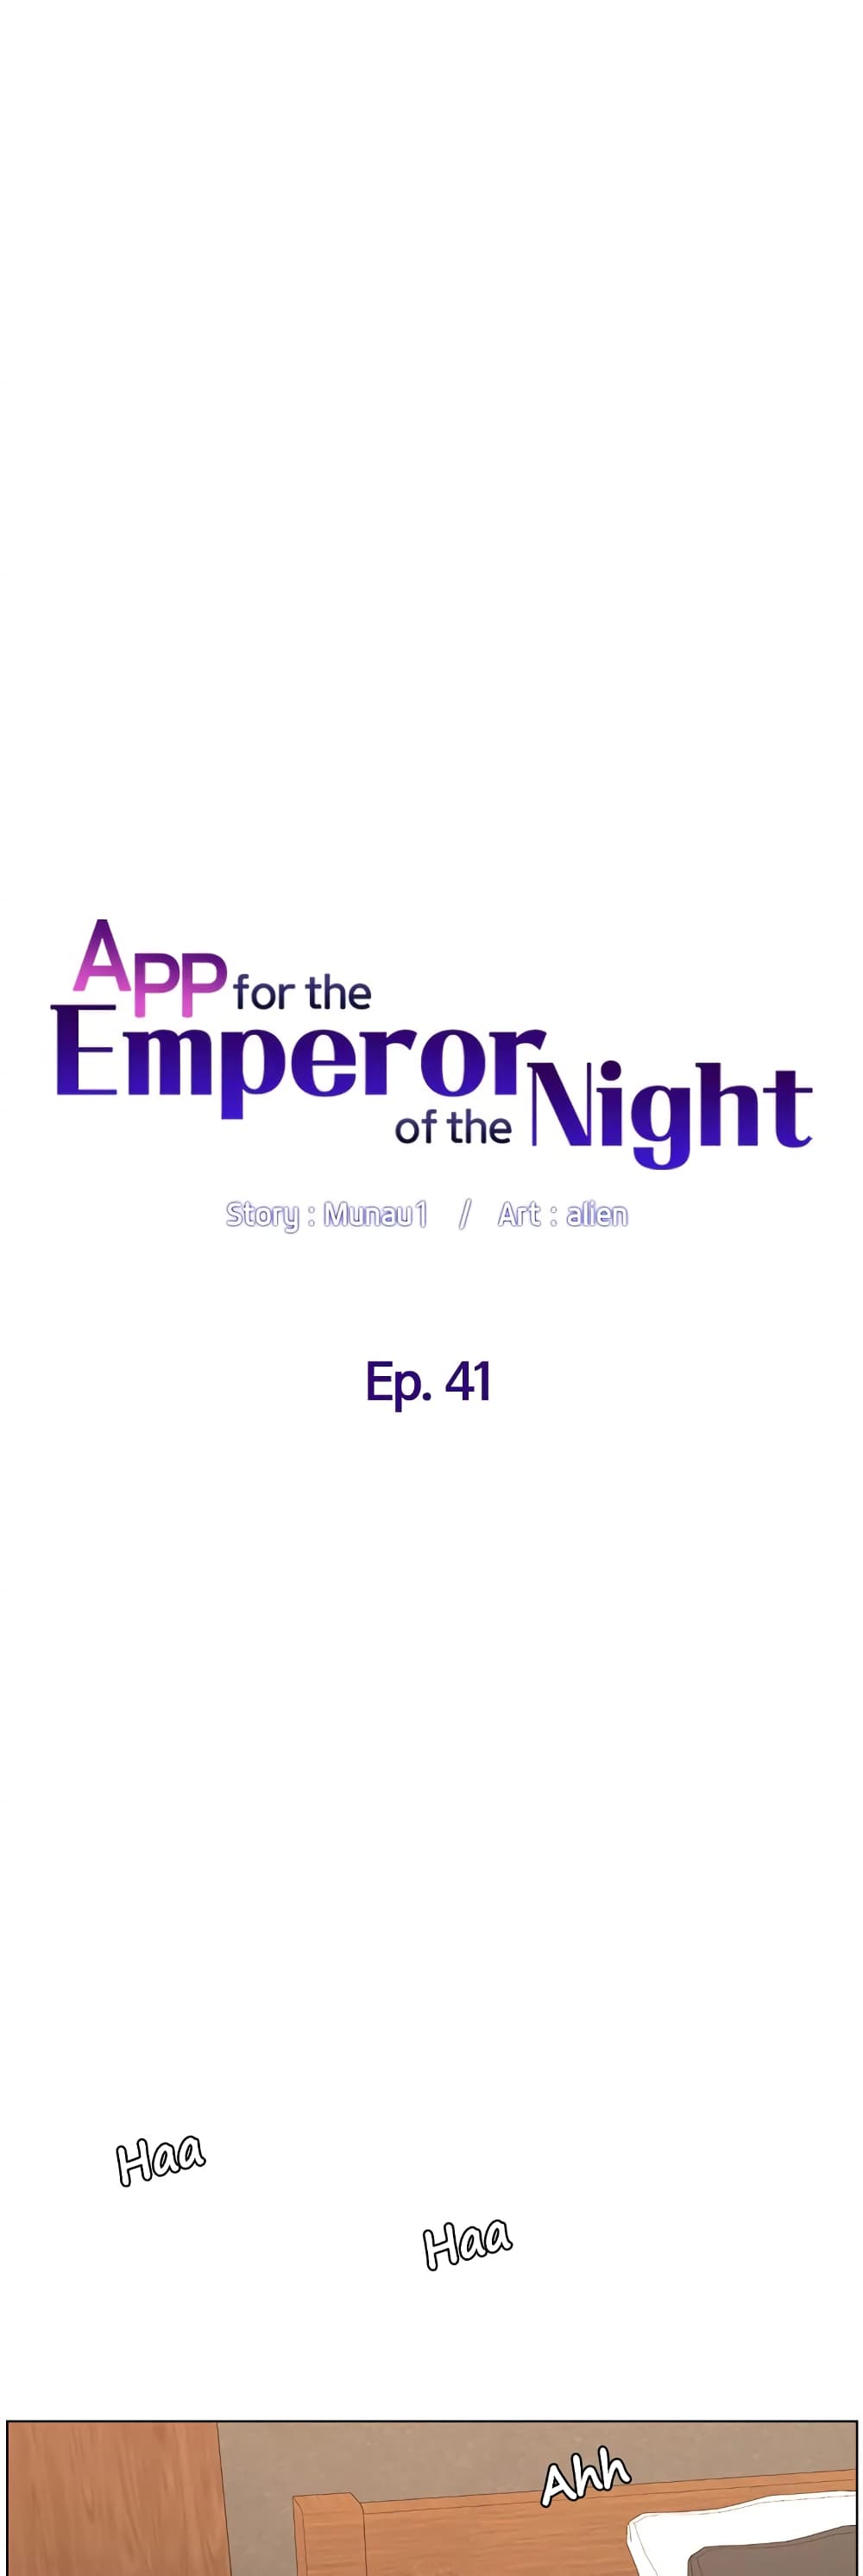 APP for the Emperor of the Night 41 (6)